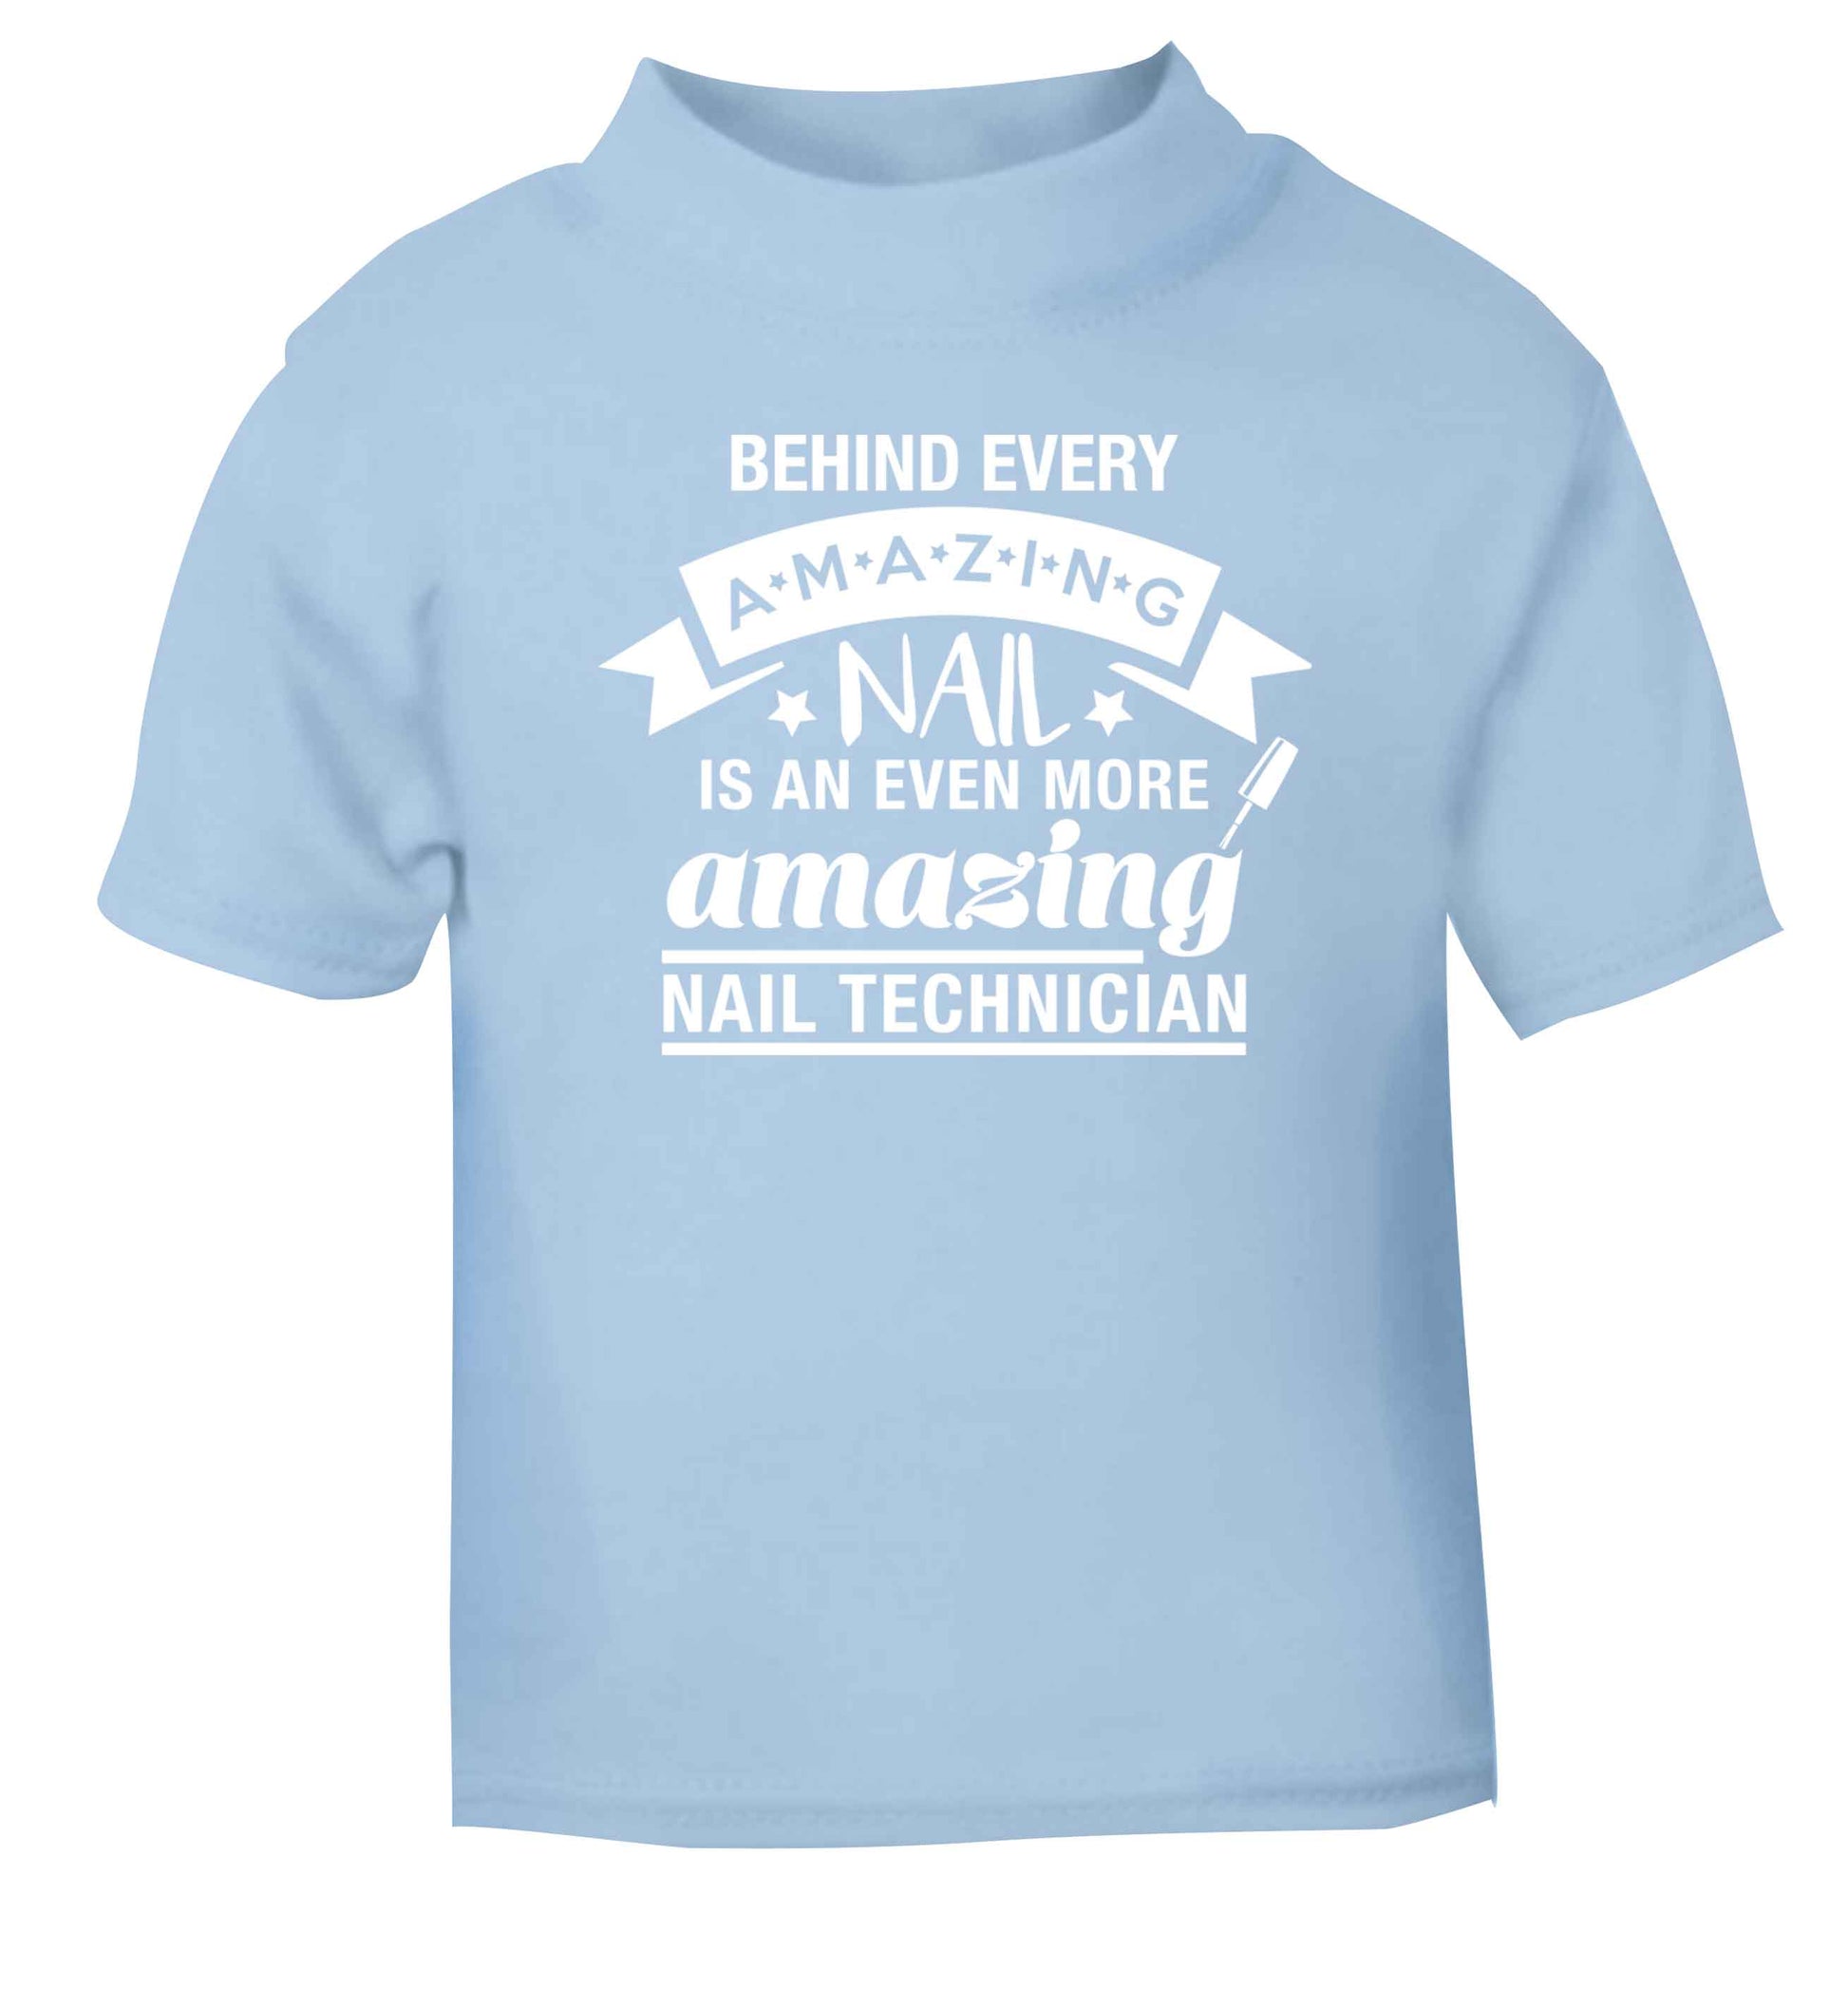 Behind every amazing nail is an even more amazing nail technician light blue baby toddler Tshirt 2 Years